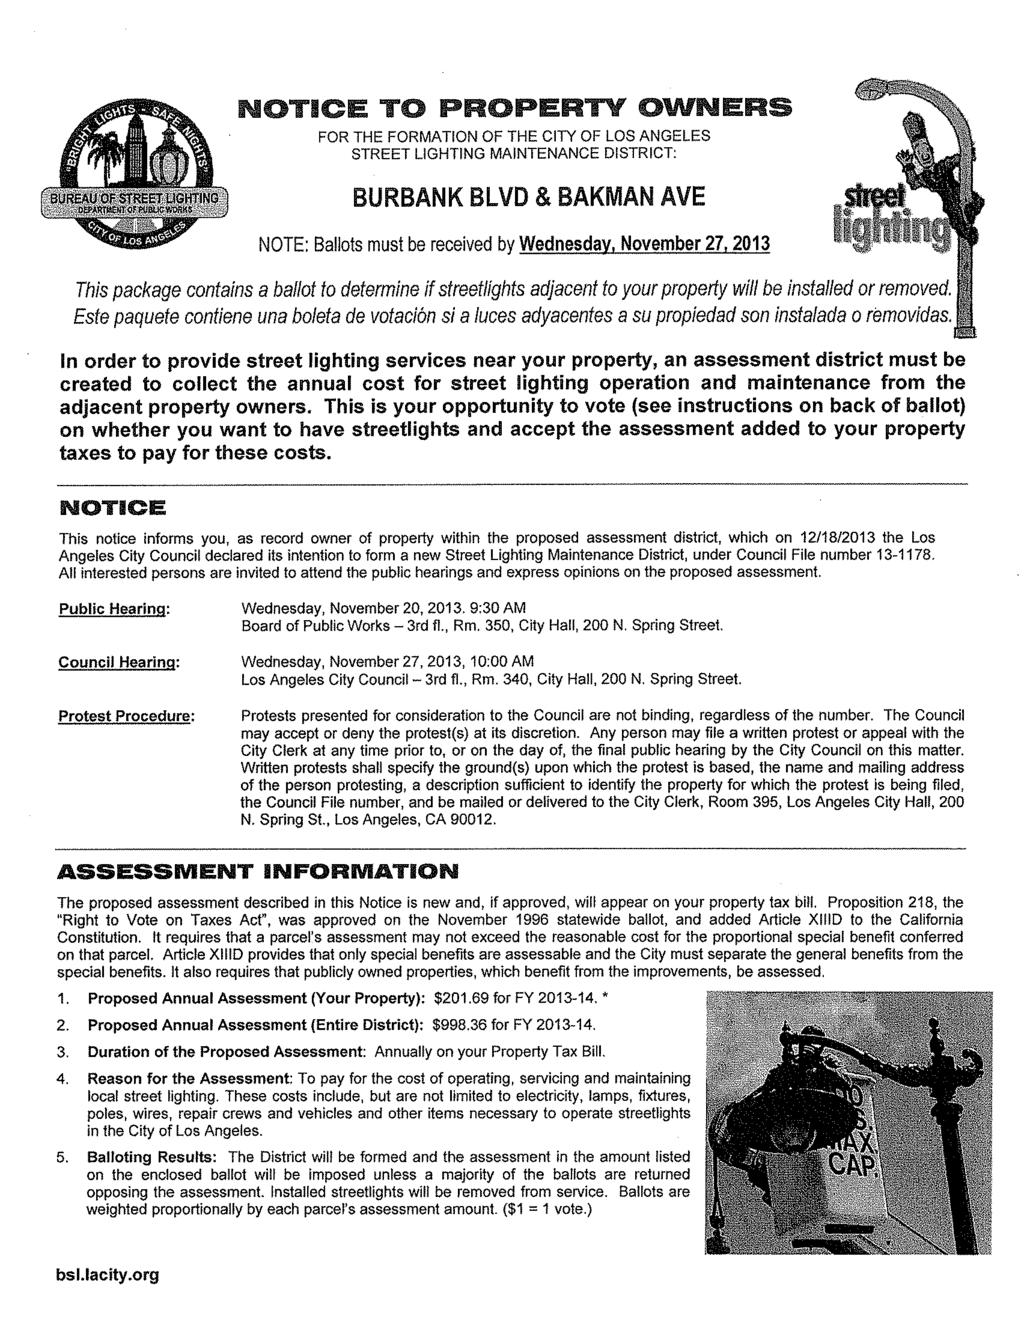 NOTICE TO PROPERTY OWNERS FOR THE FORMATION OF THE CITY OF LOS ANGELES STREET LIGHTING MAINTENANCE DISTRICT: BURBANK BLVD & BAKMAN AVE NOTE: Ballots must be received by Wednesday, November 27,2013